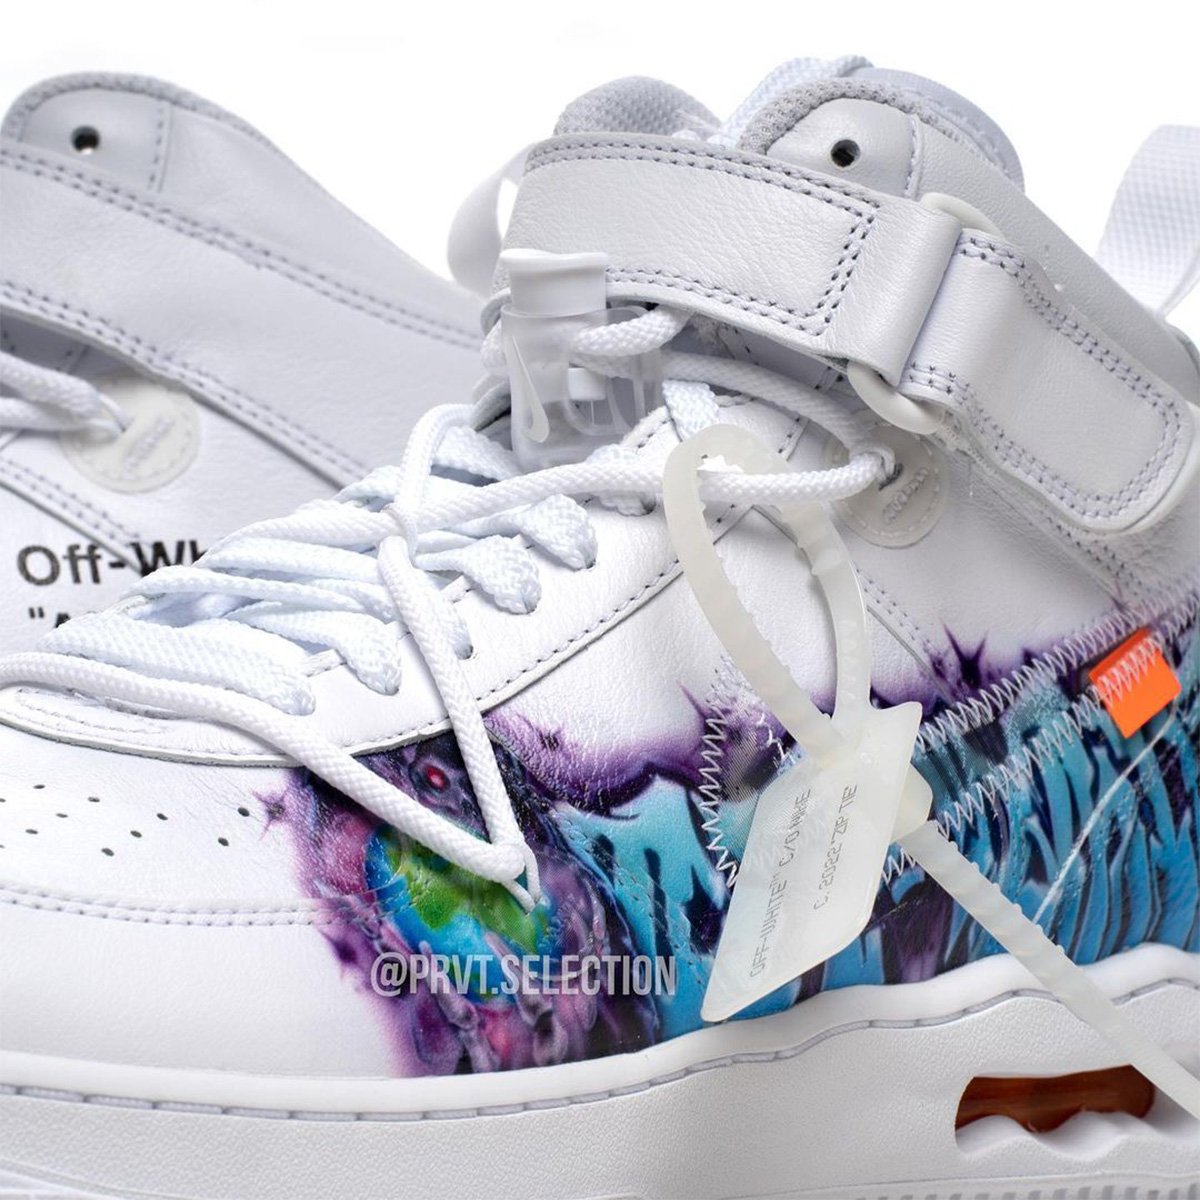 Off-White Nike Air Force 1 Mid Graffiti Release Date